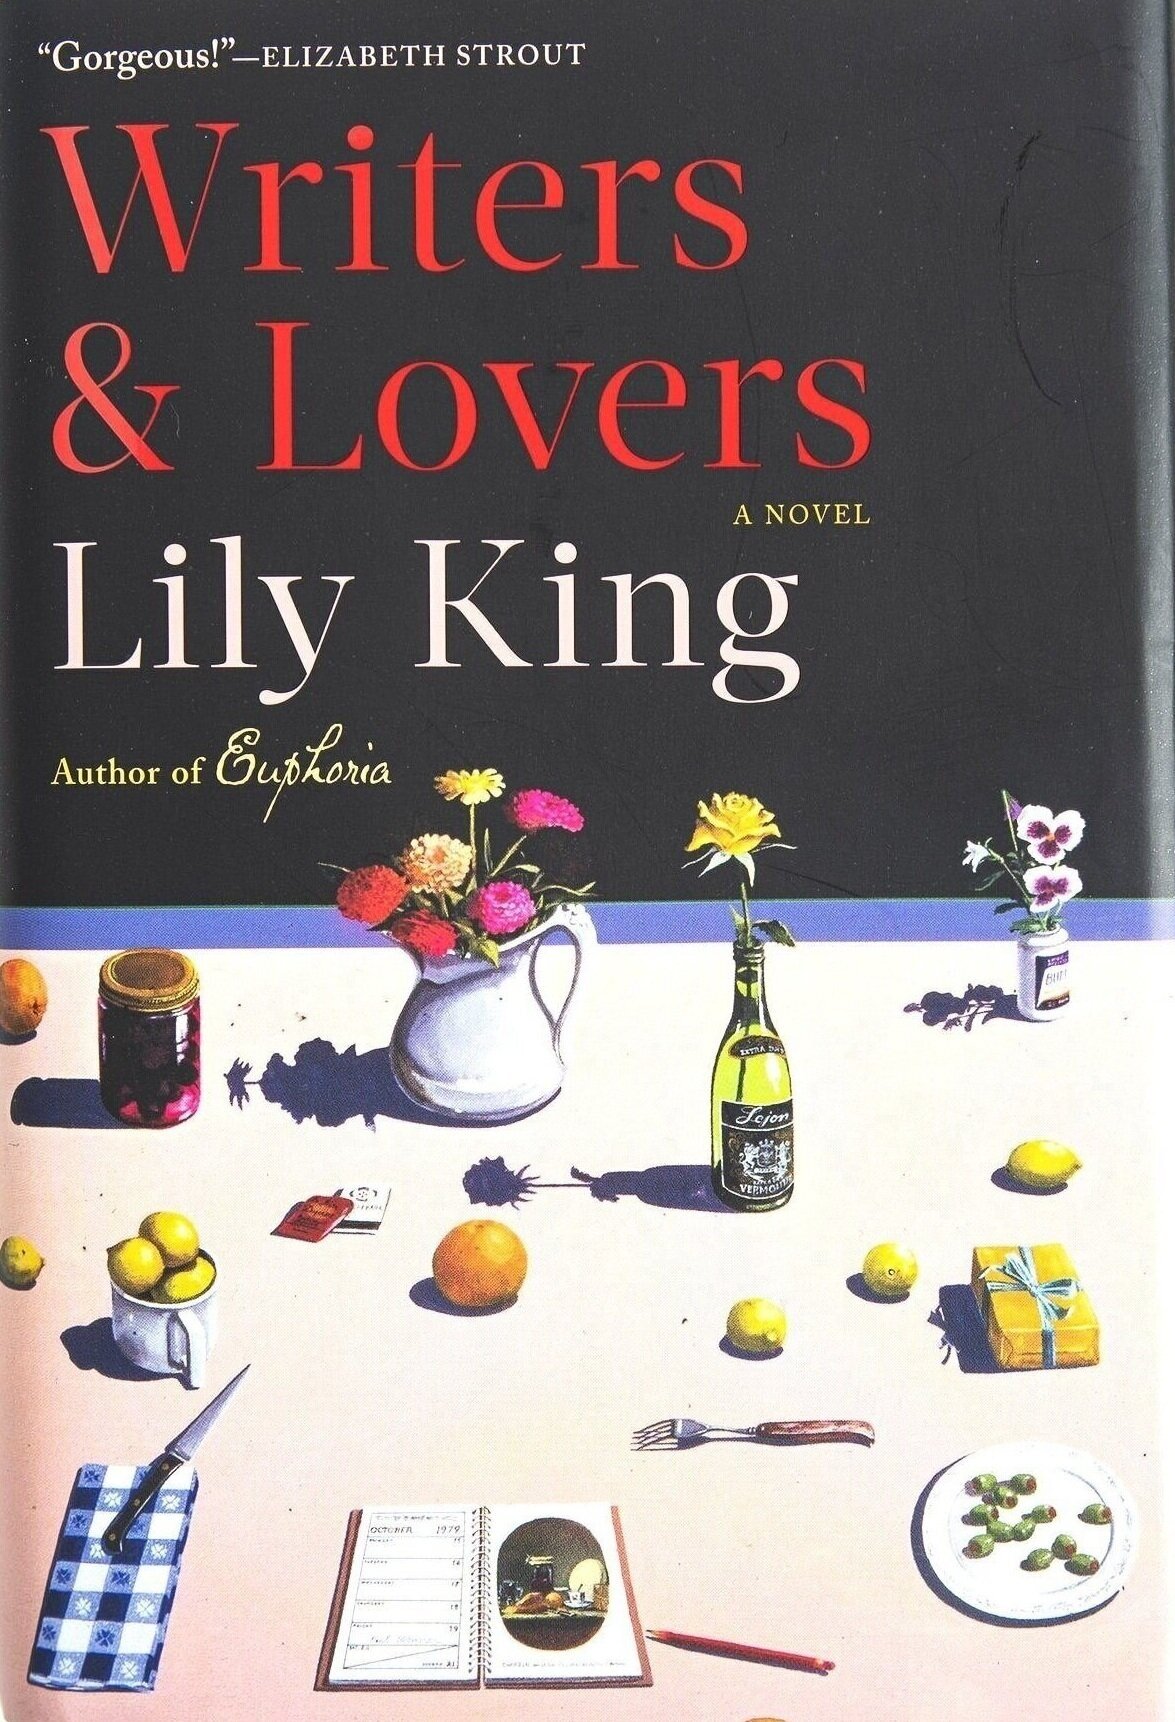 Writers & Lovers — Lily King